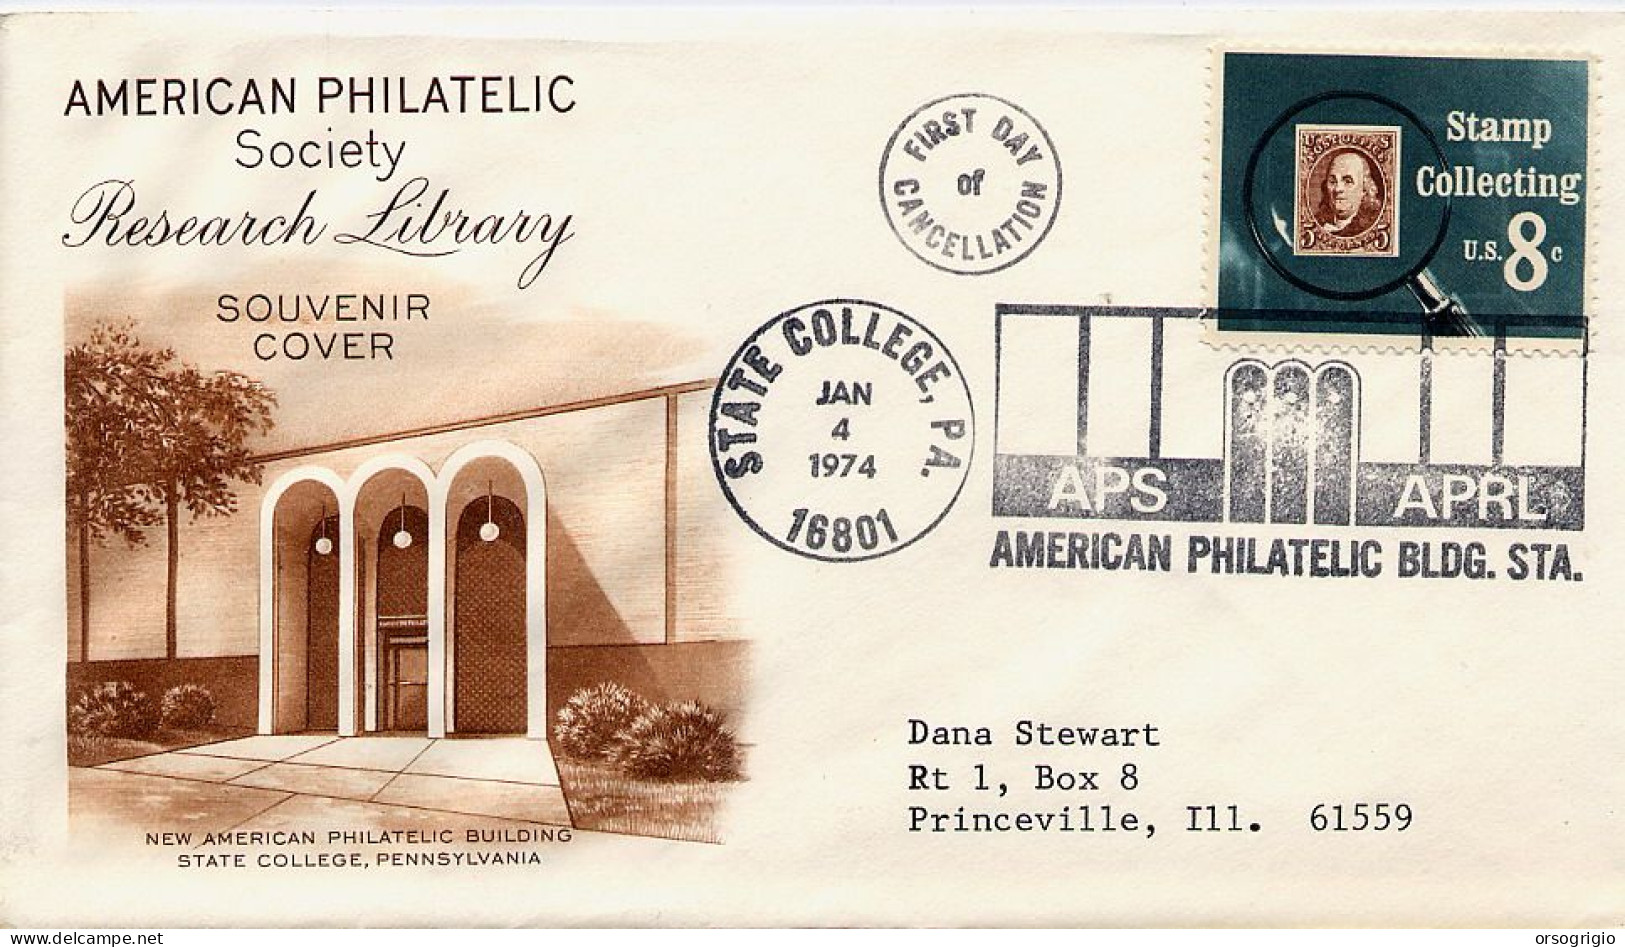 USA -  AMERICAN PHILATELIC SOCIETY BLDG - STATE COLLEGE, PA - First Day Cancellation  JAN 4 1974 - 1971-1980